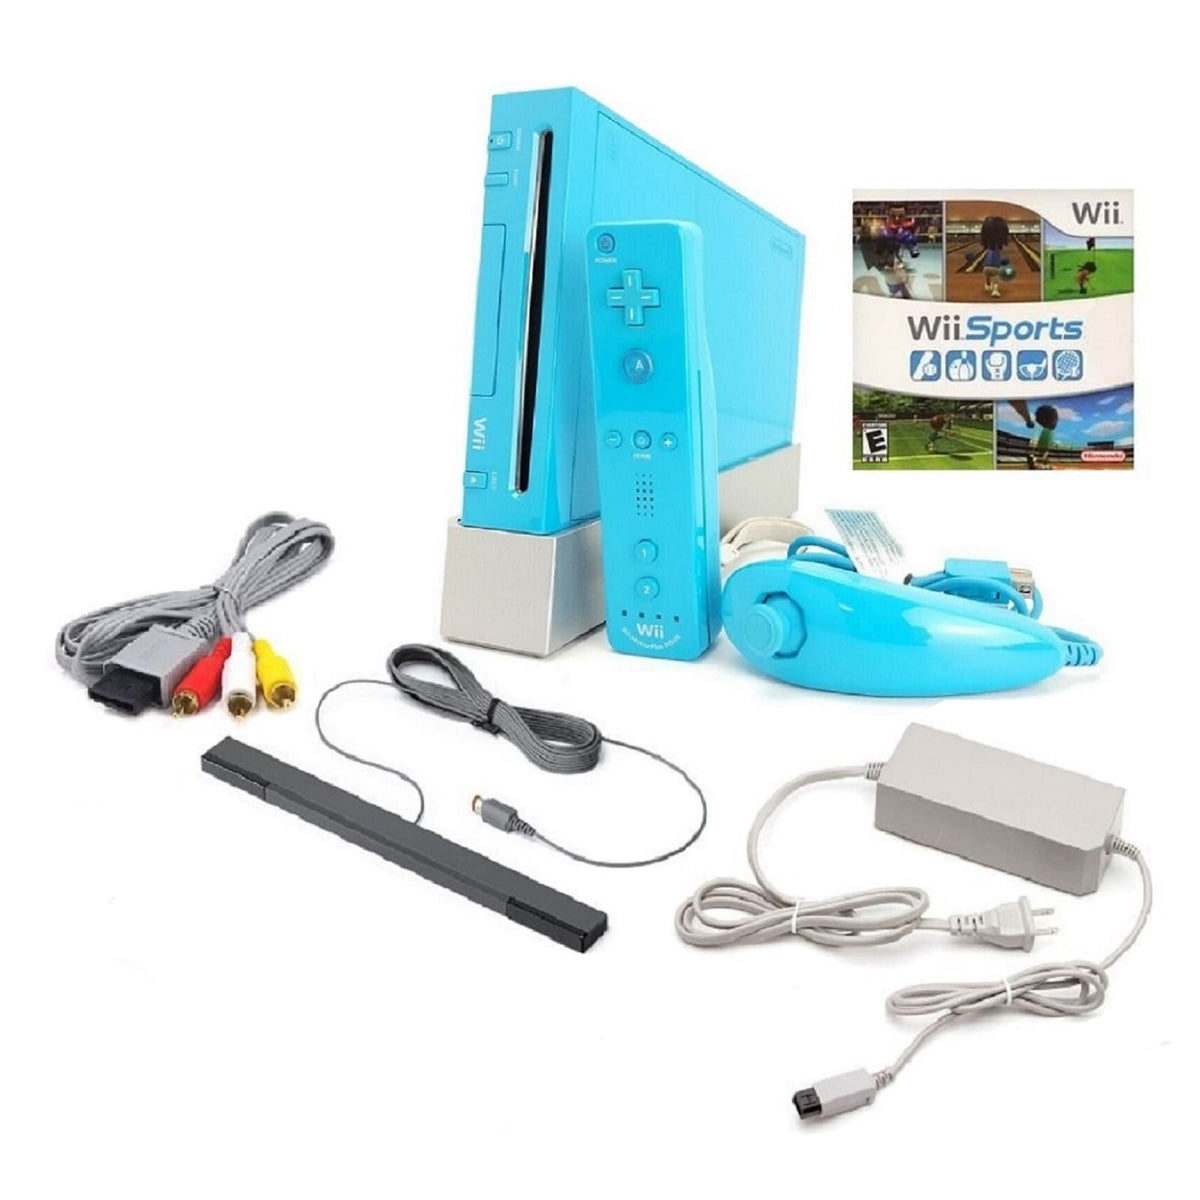 Nintendo Wii Limited Edition Blue Video Game Console Home System RVL-101